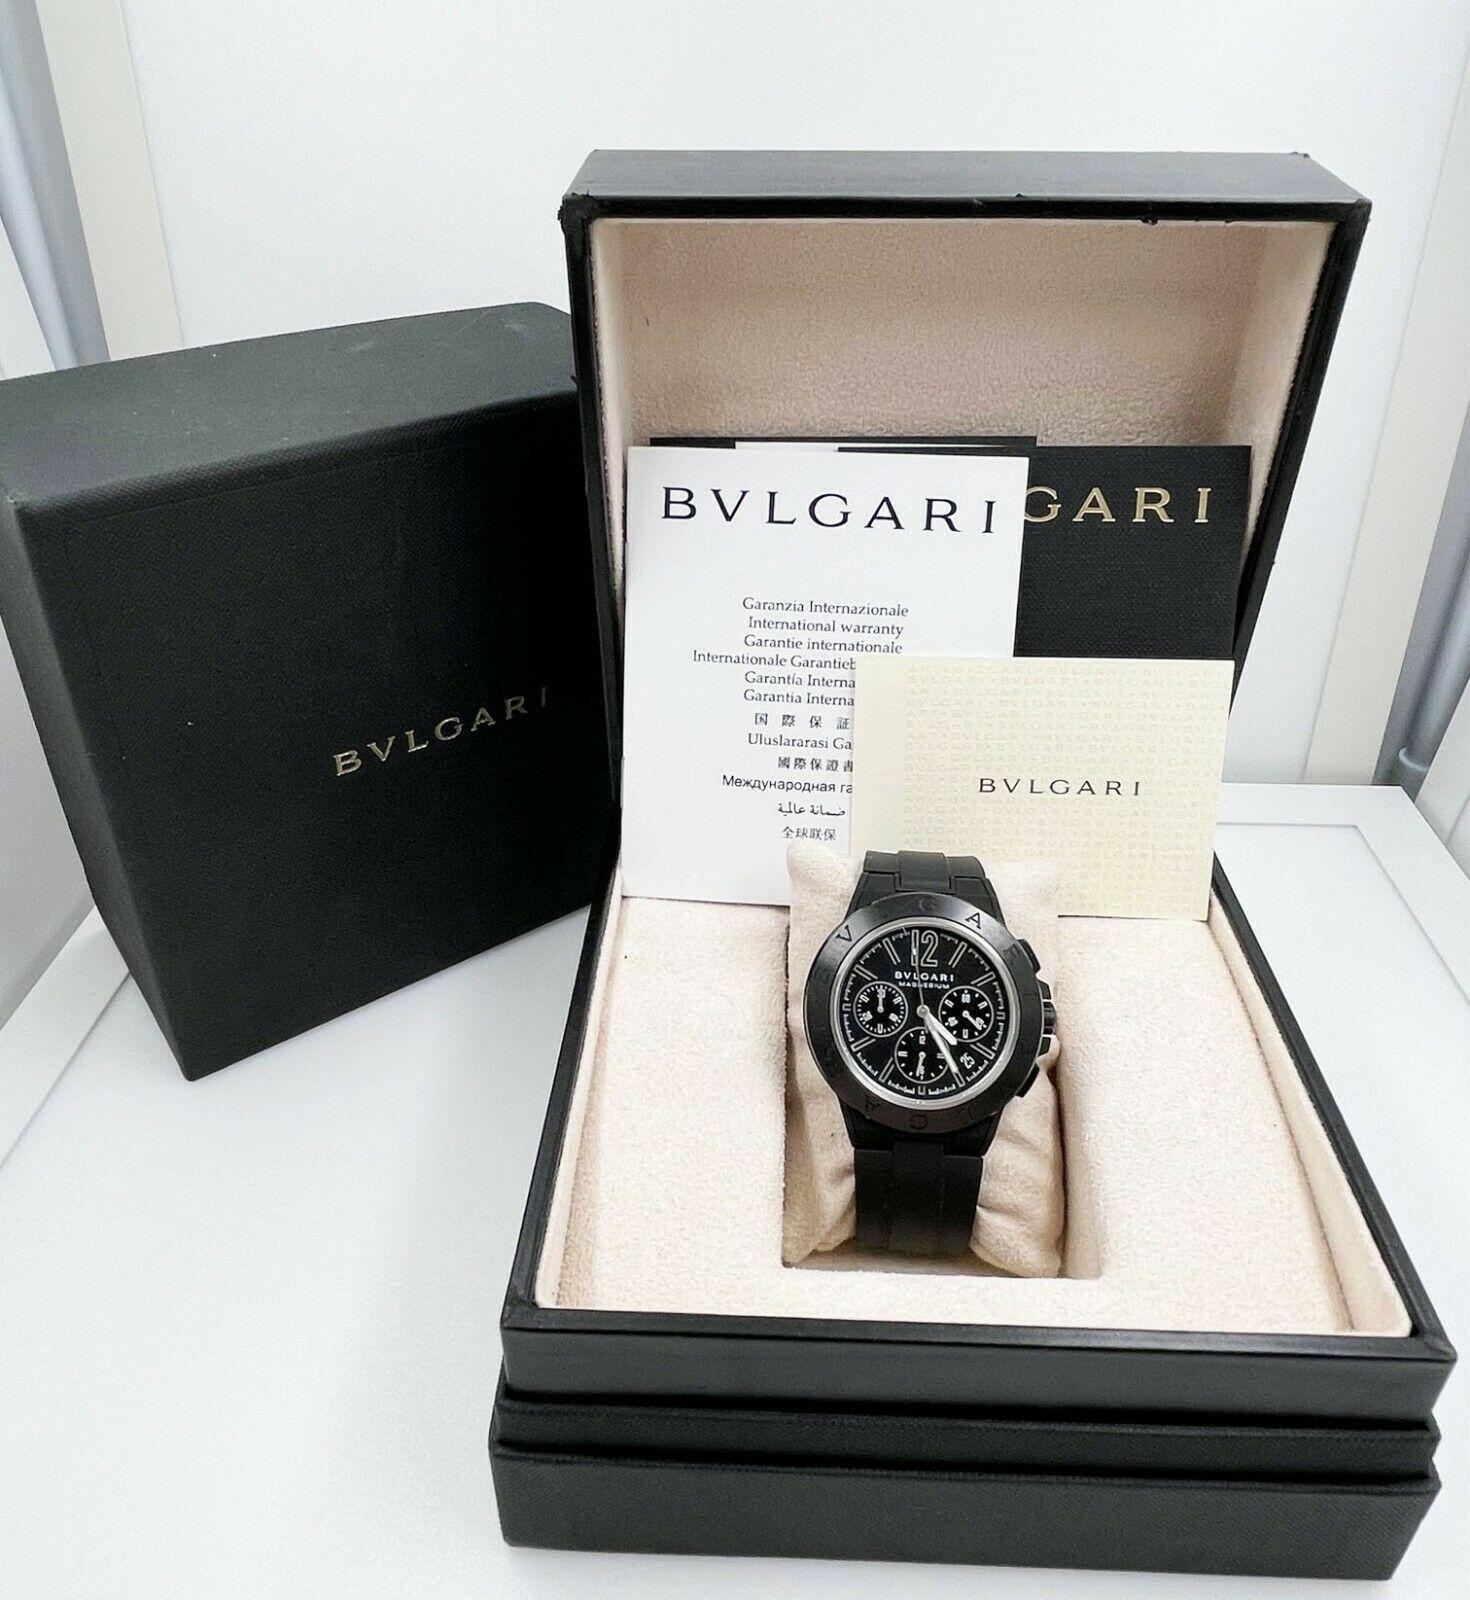 Style Number:  DG 42 SMC 

 

Model: Diagono

 

Case Material: Black Ceramic

 

Band: Black Rubber

 

Bezel:  Ceramic

 

Dial: Black

 

Face: Sapphire Crystal 

 

Case Size: 42mm 

 

Includes: 

-Bulgari Box & Papers 

-Certified Appraisal